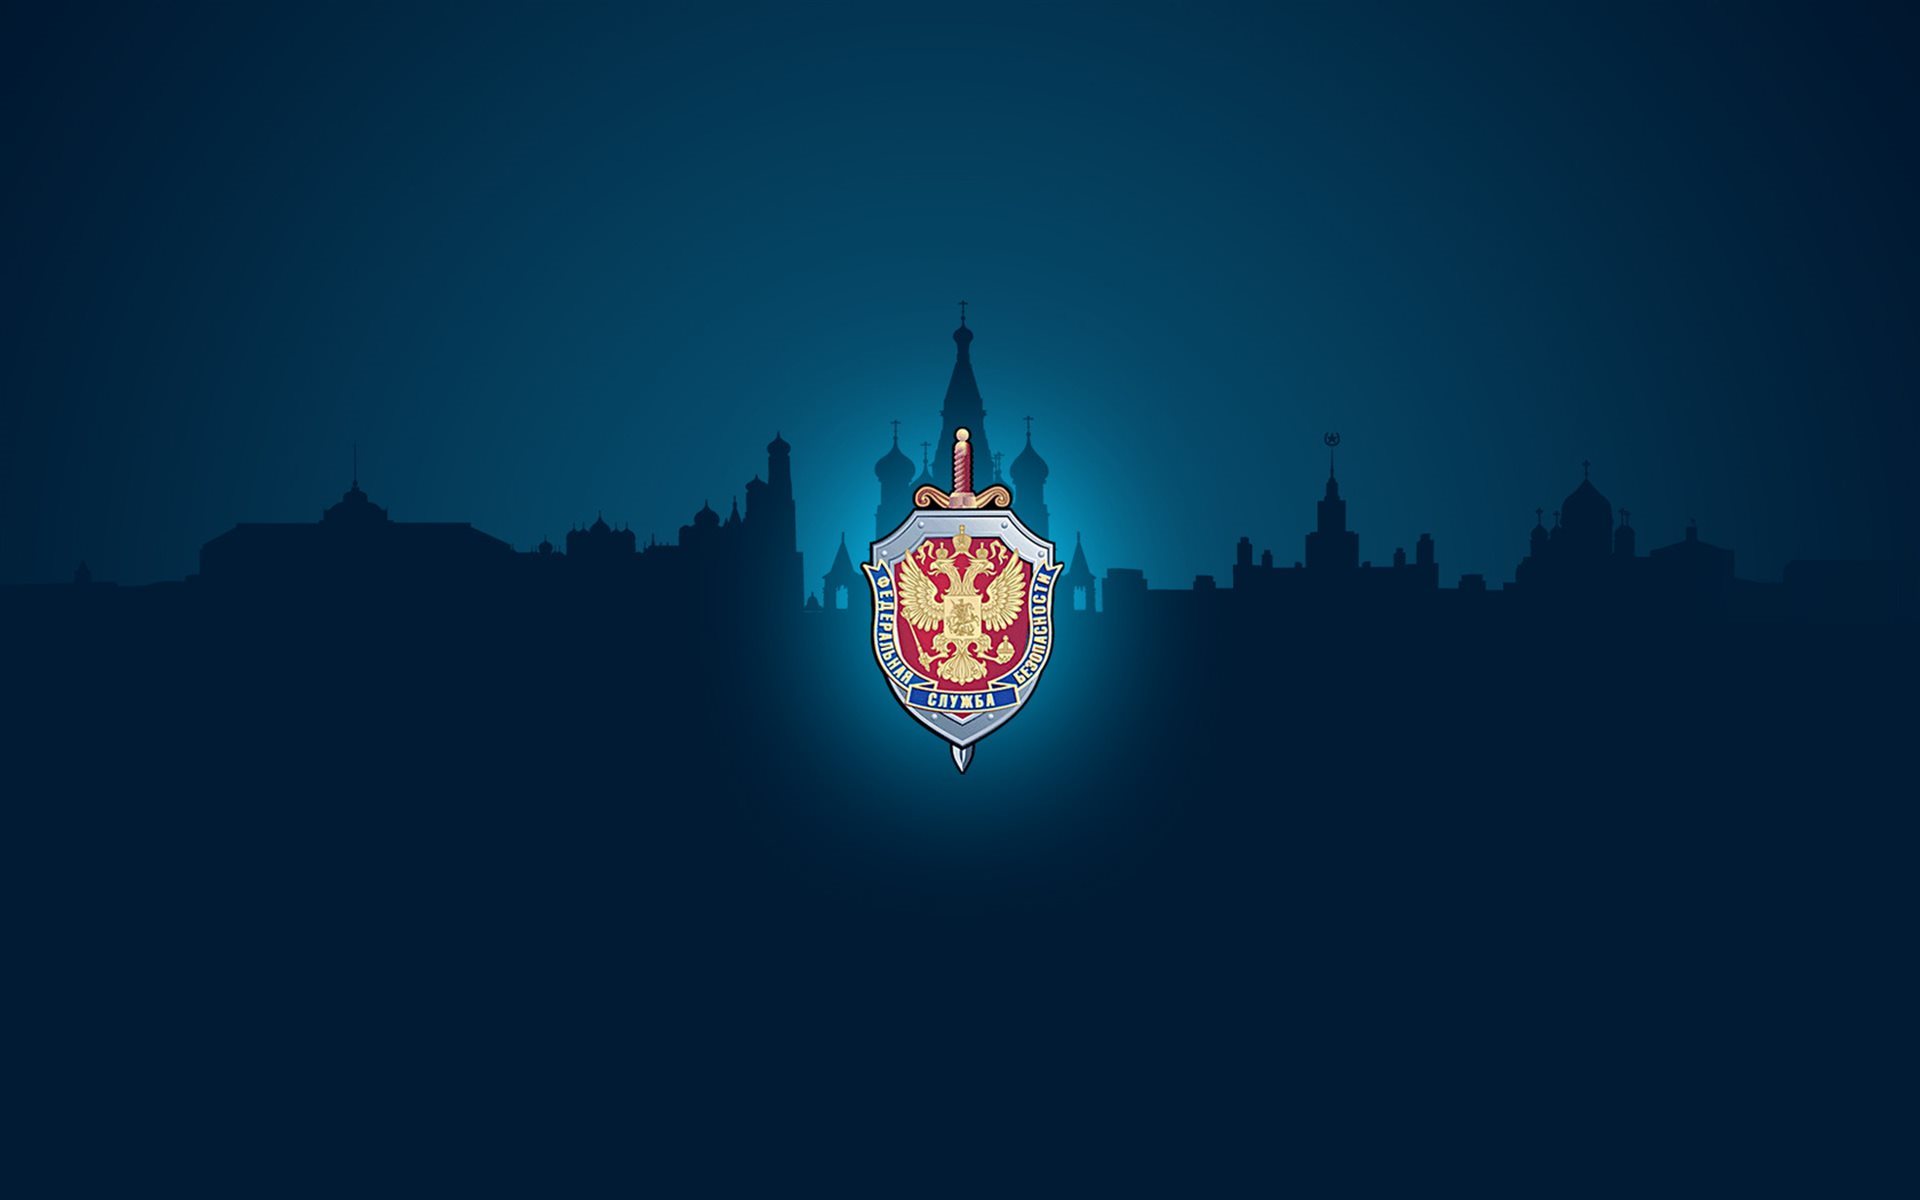 Download wallpaper emblem, coat of arms, fsb, blue background for desktop with resolution 1920x1200. High Quality HD picture wallpaper